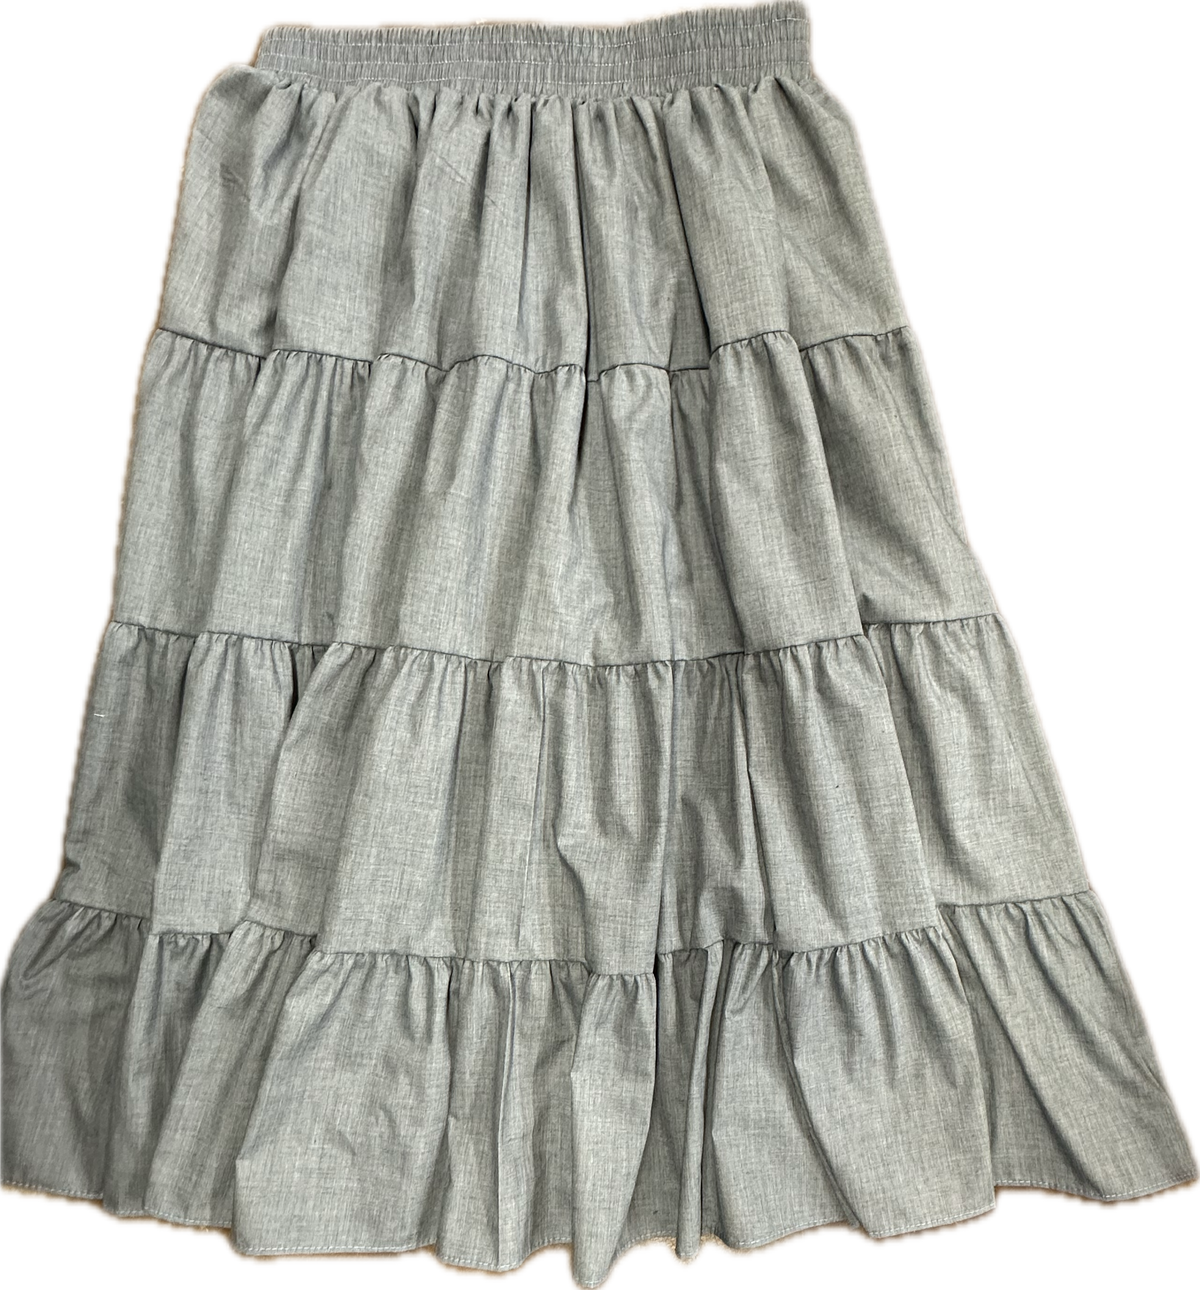 Four-tiered Basic 4 Tier Prairie Skirt on a plain background by Square Up Fashions.